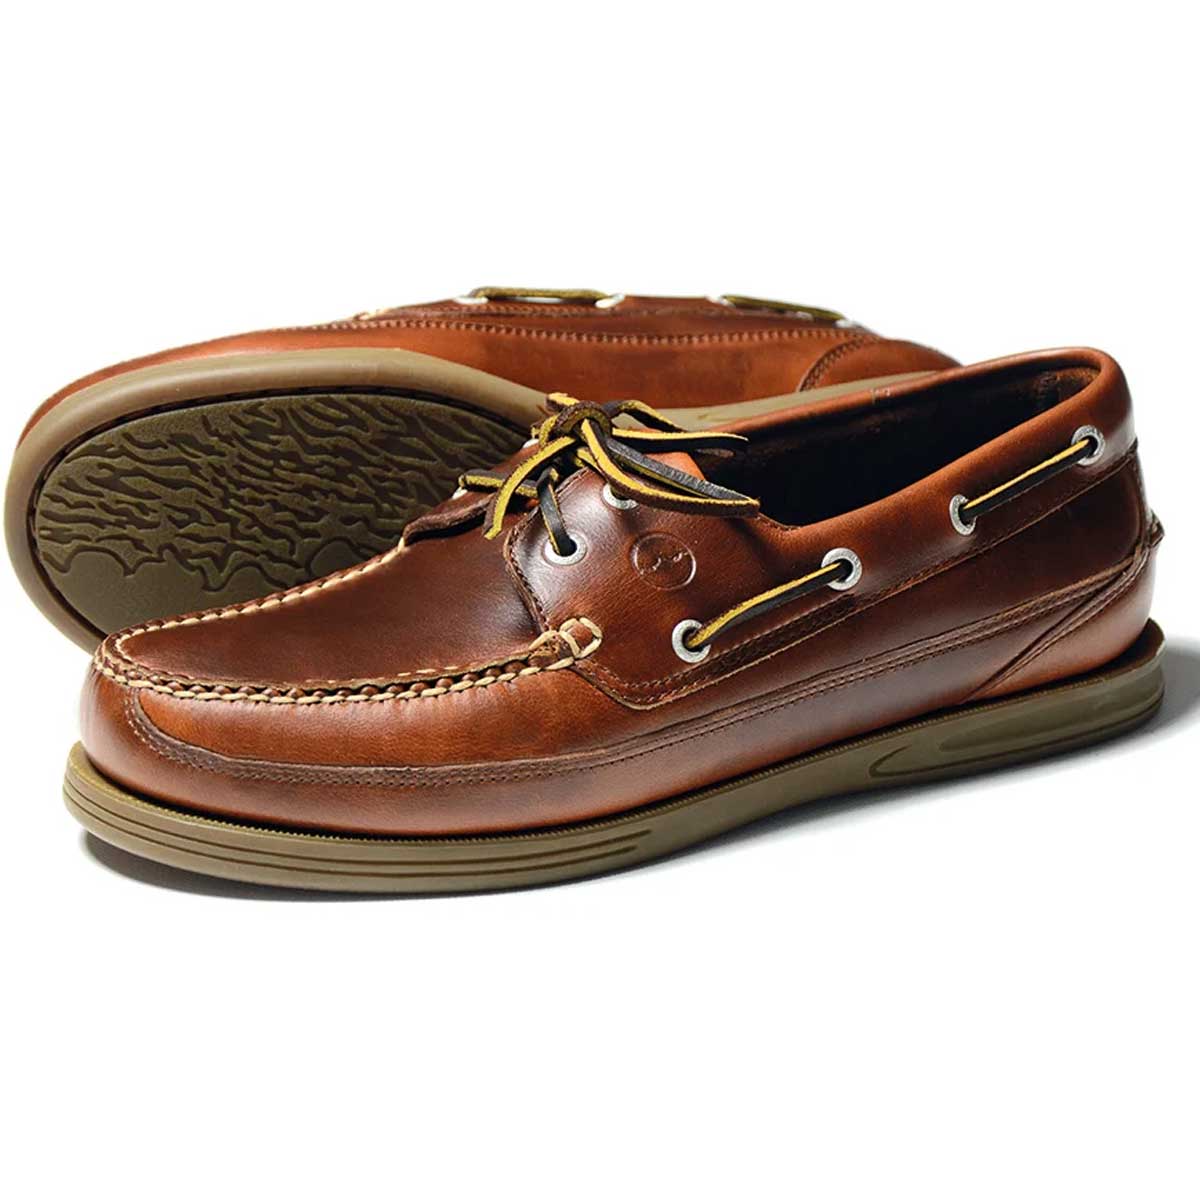 ORCA BAY Mens Fowey Leather Deck Shoes - Saddle